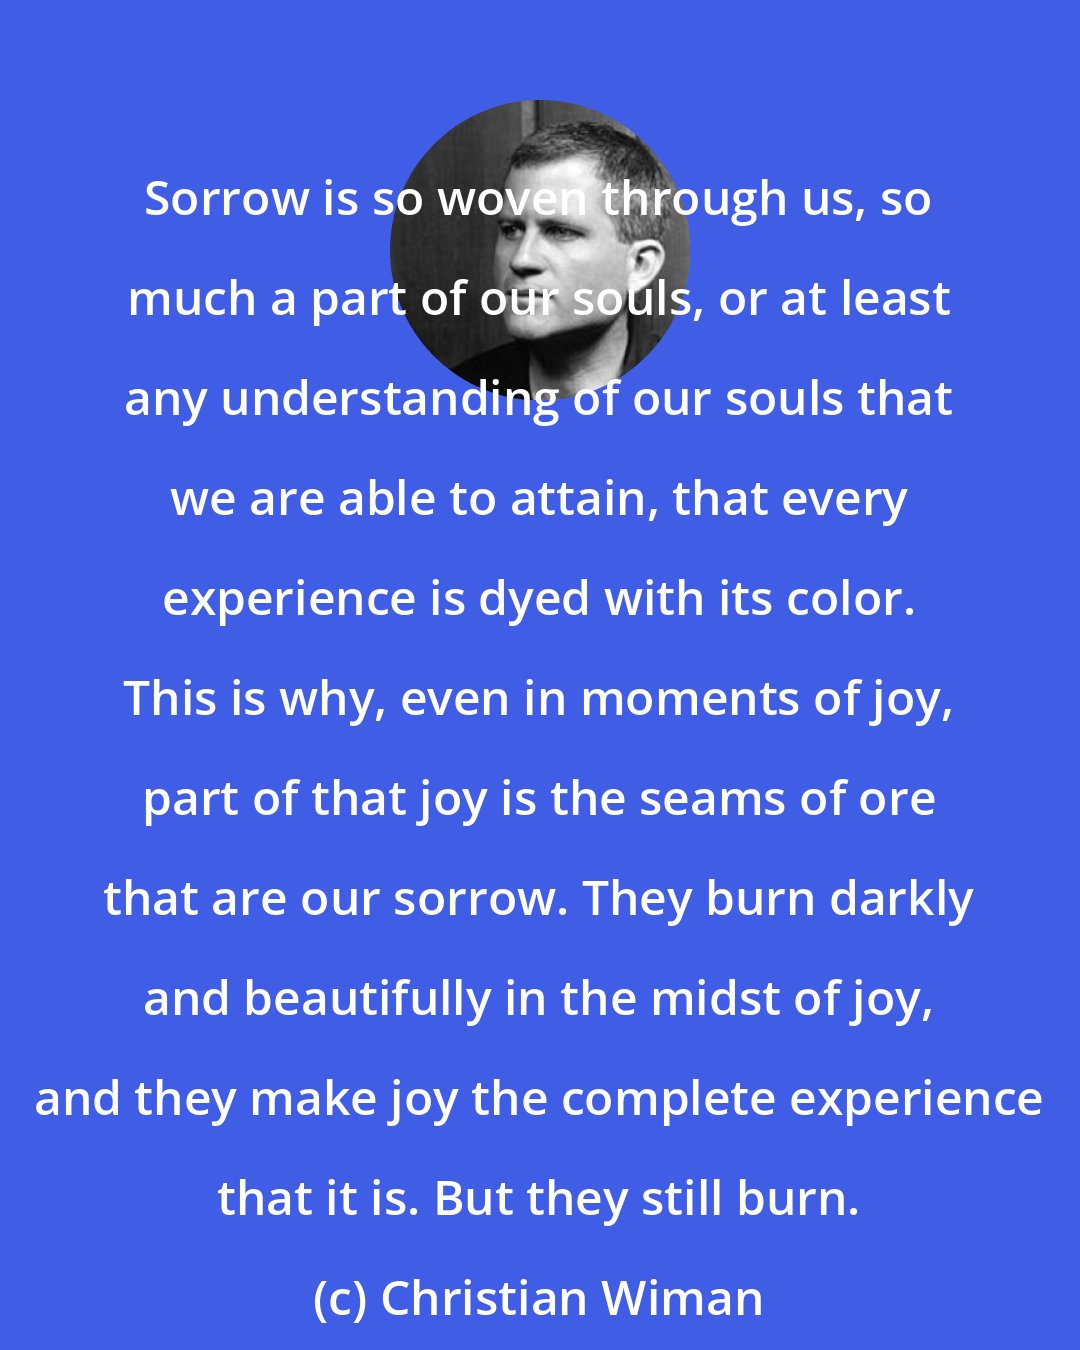 Christian Wiman: Sorrow is so woven through us, so much a part of our souls, or at least any understanding of our souls that we are able to attain, that every experience is dyed with its color. This is why, even in moments of joy, part of that joy is the seams of ore that are our sorrow. They burn darkly and beautifully in the midst of joy, and they make joy the complete experience that it is. But they still burn.